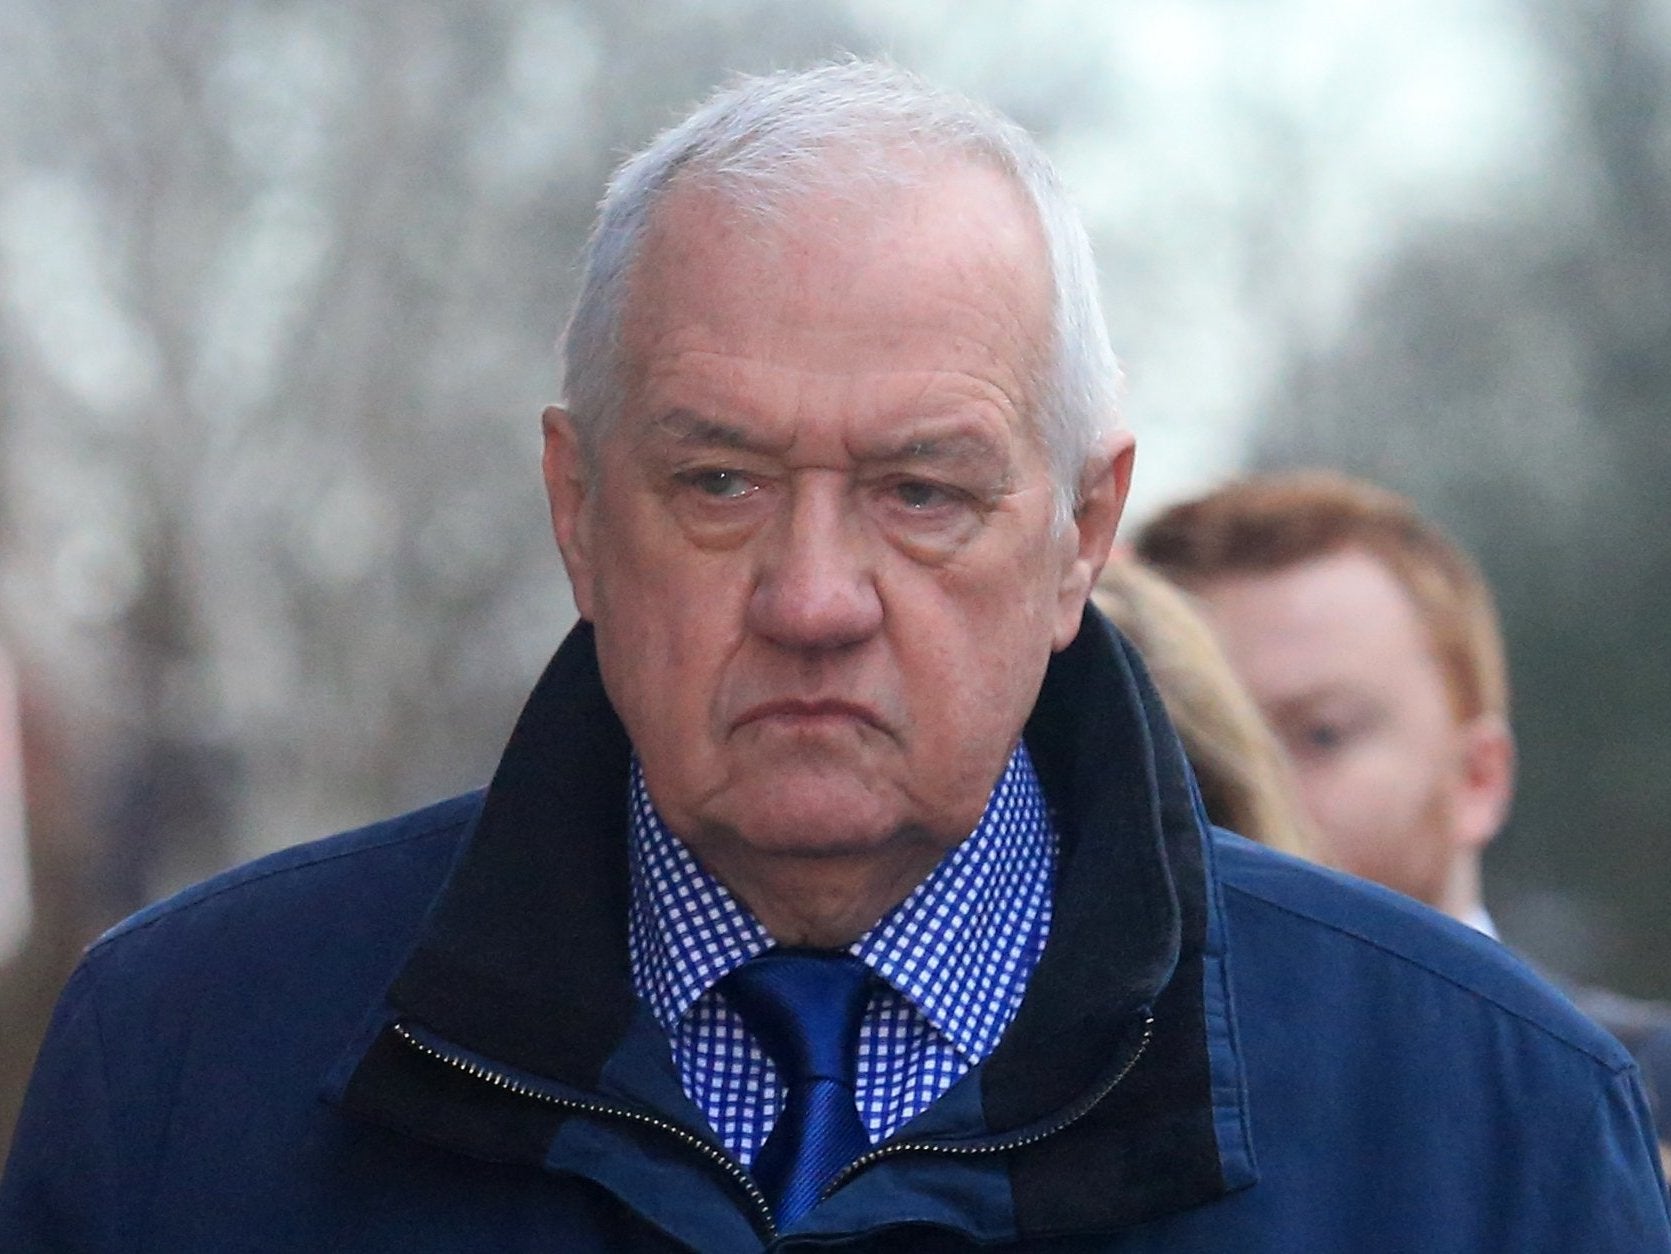 David Duckenfield, matchday police commander at the Hillsborough football stadium disaster, arrives at court in Preston on Monday